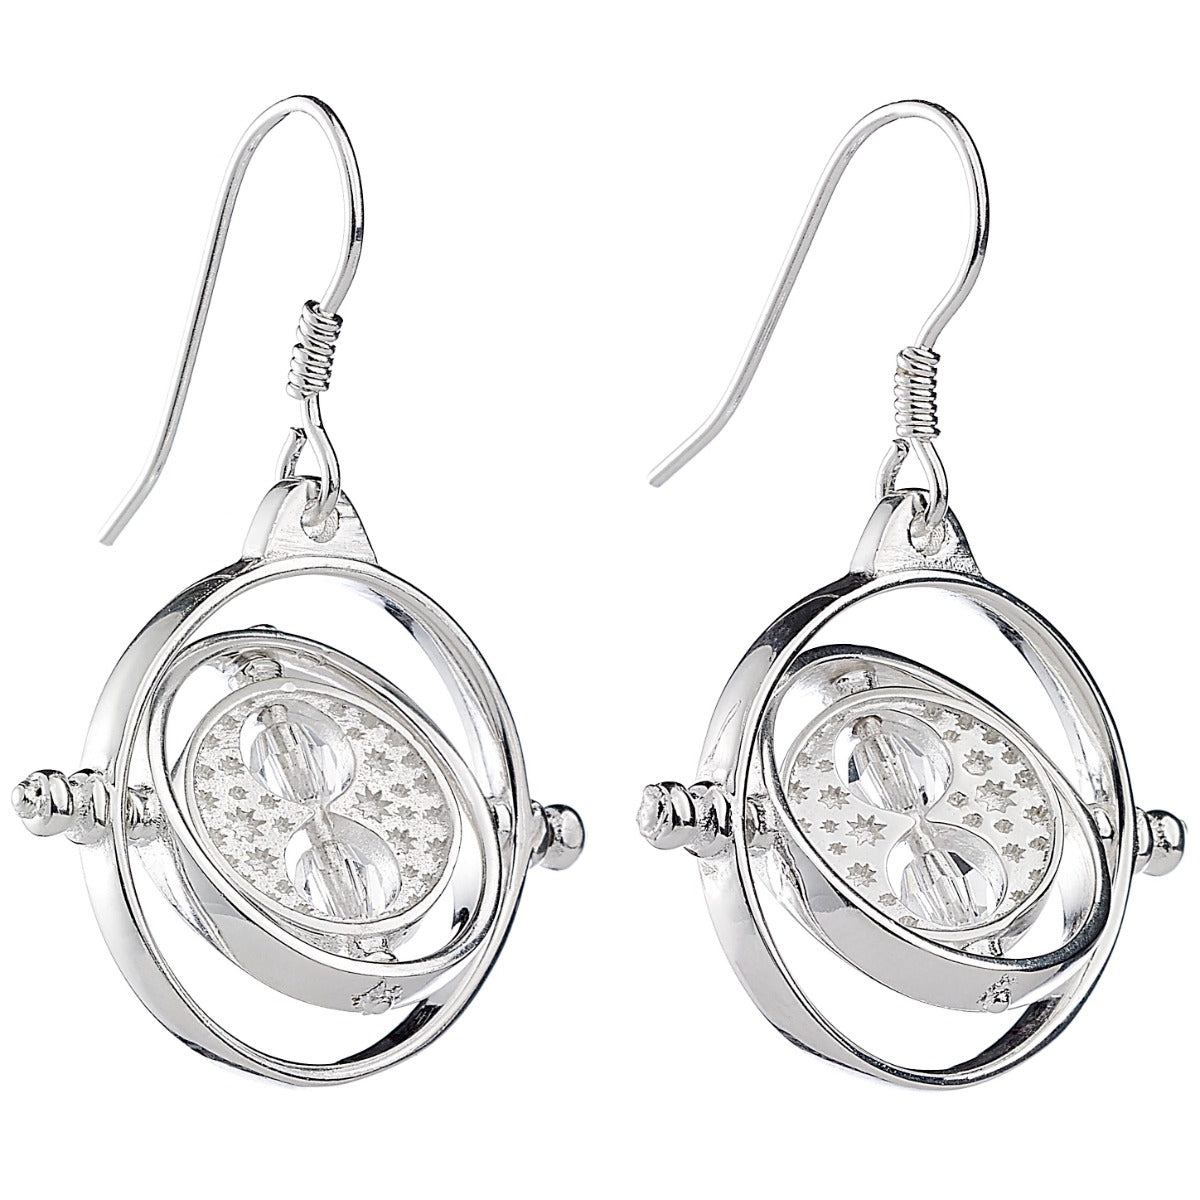 Harry Potter Time Turner Drop Earrings Embellished with Crystals - Sterling Silver